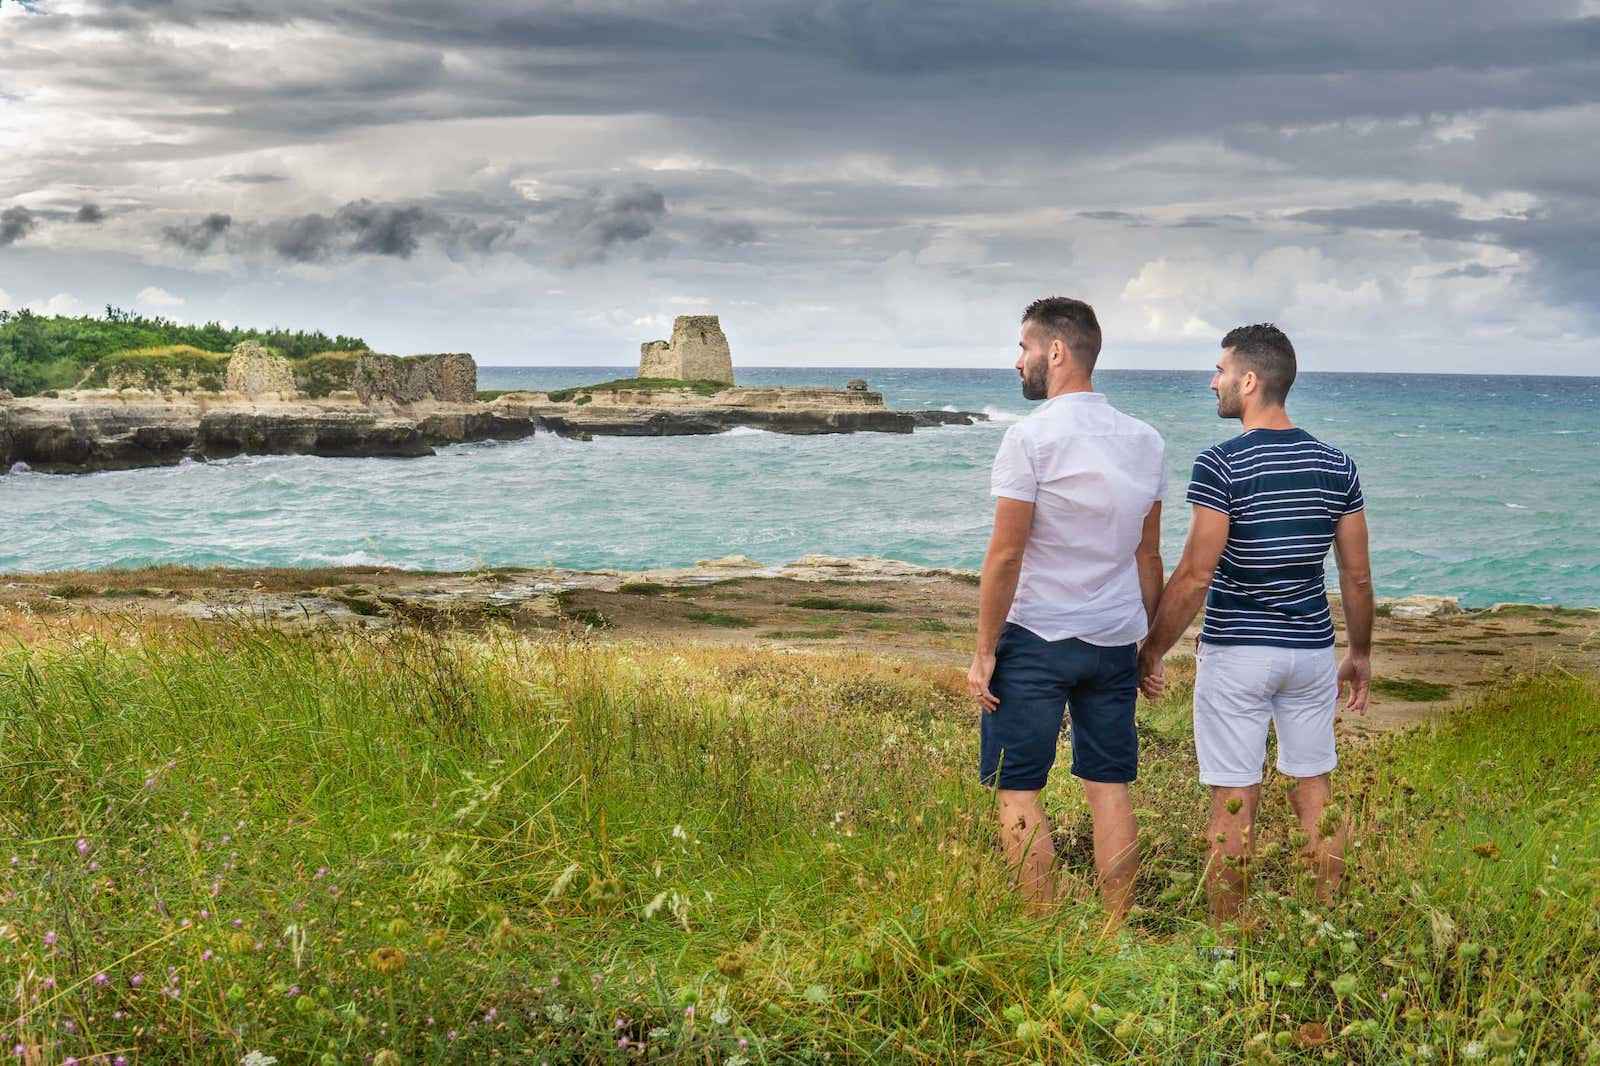 Nomadic Boys holding hands and standing on grass looking out over a headland with a stormy sky in Puglia in italy.